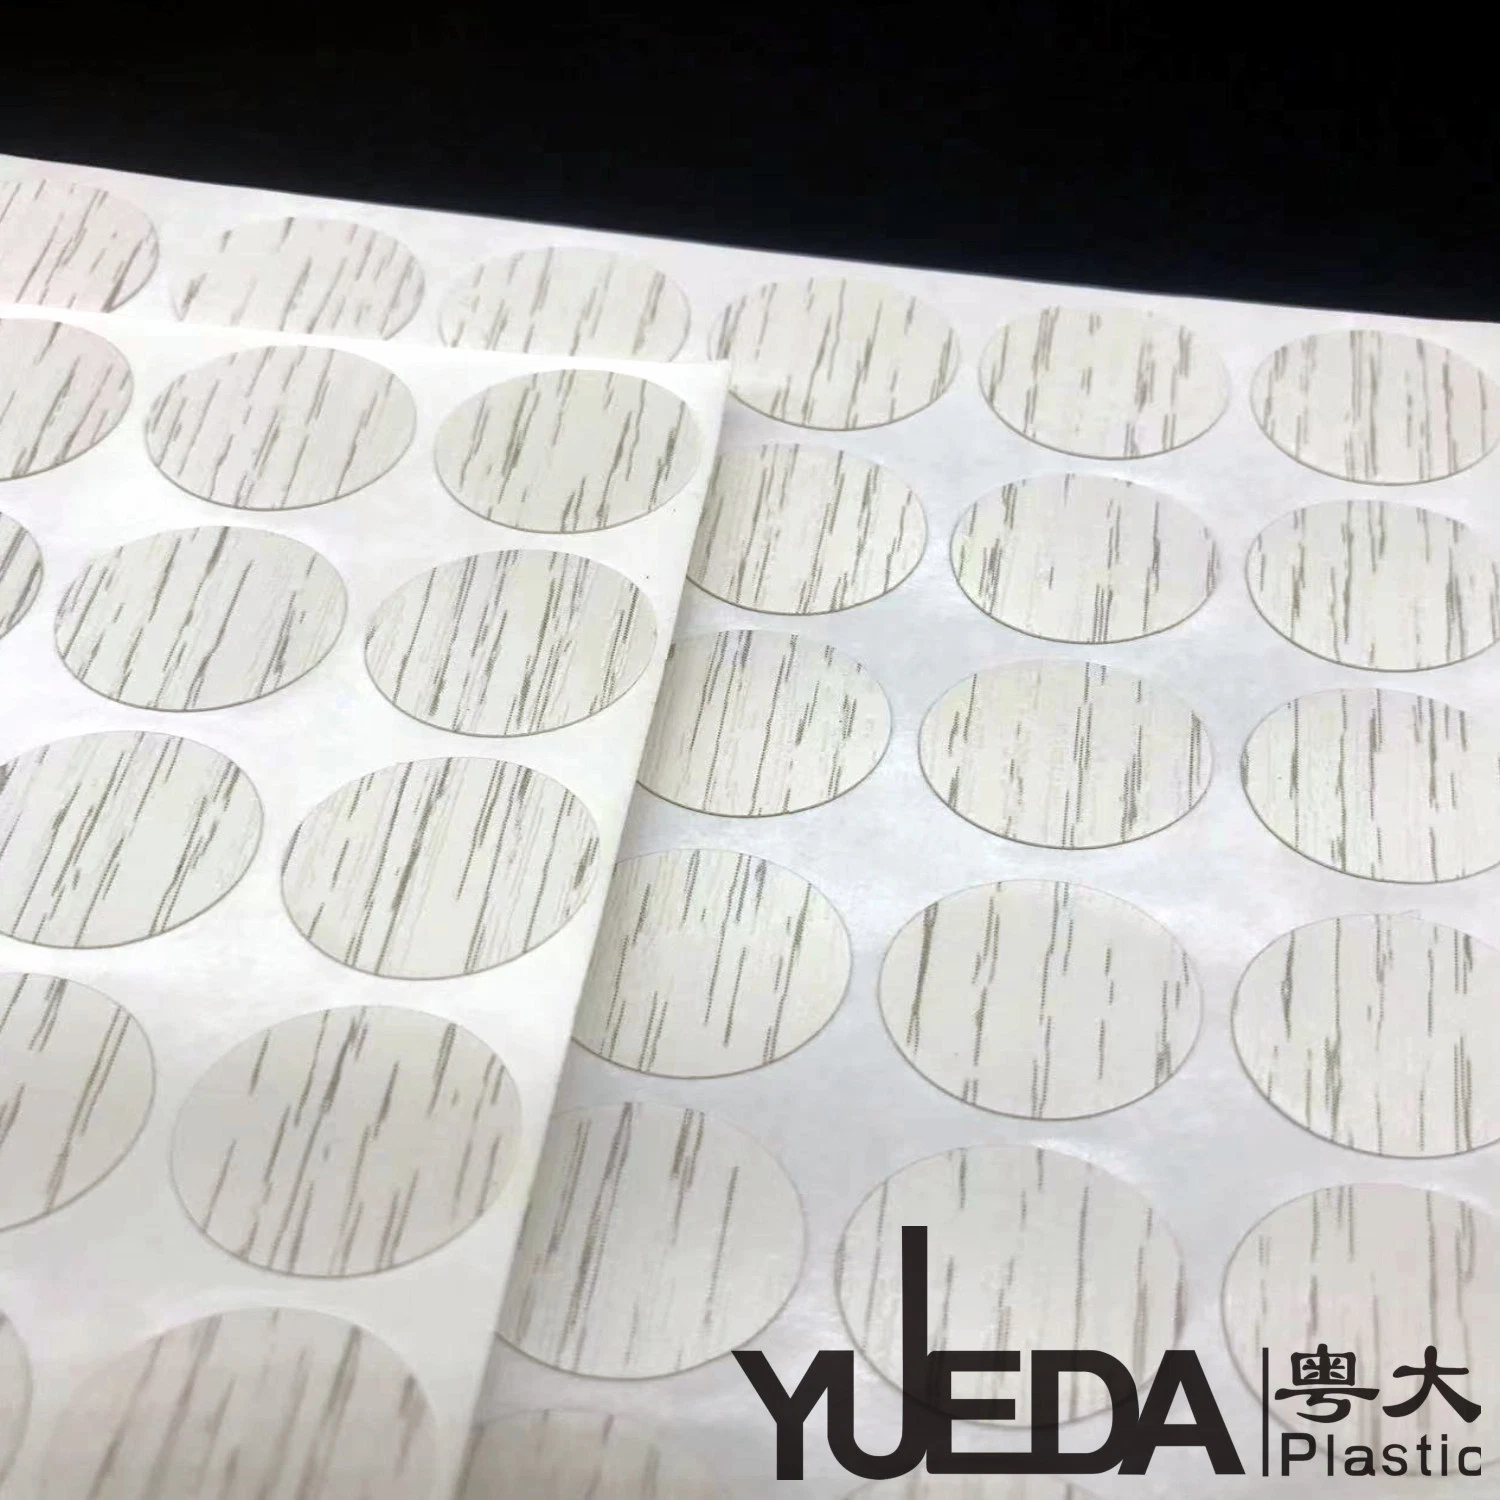 Yueda Adhesive Plastic Style Wall Screw Hole Covers, Furniture Hole Cover